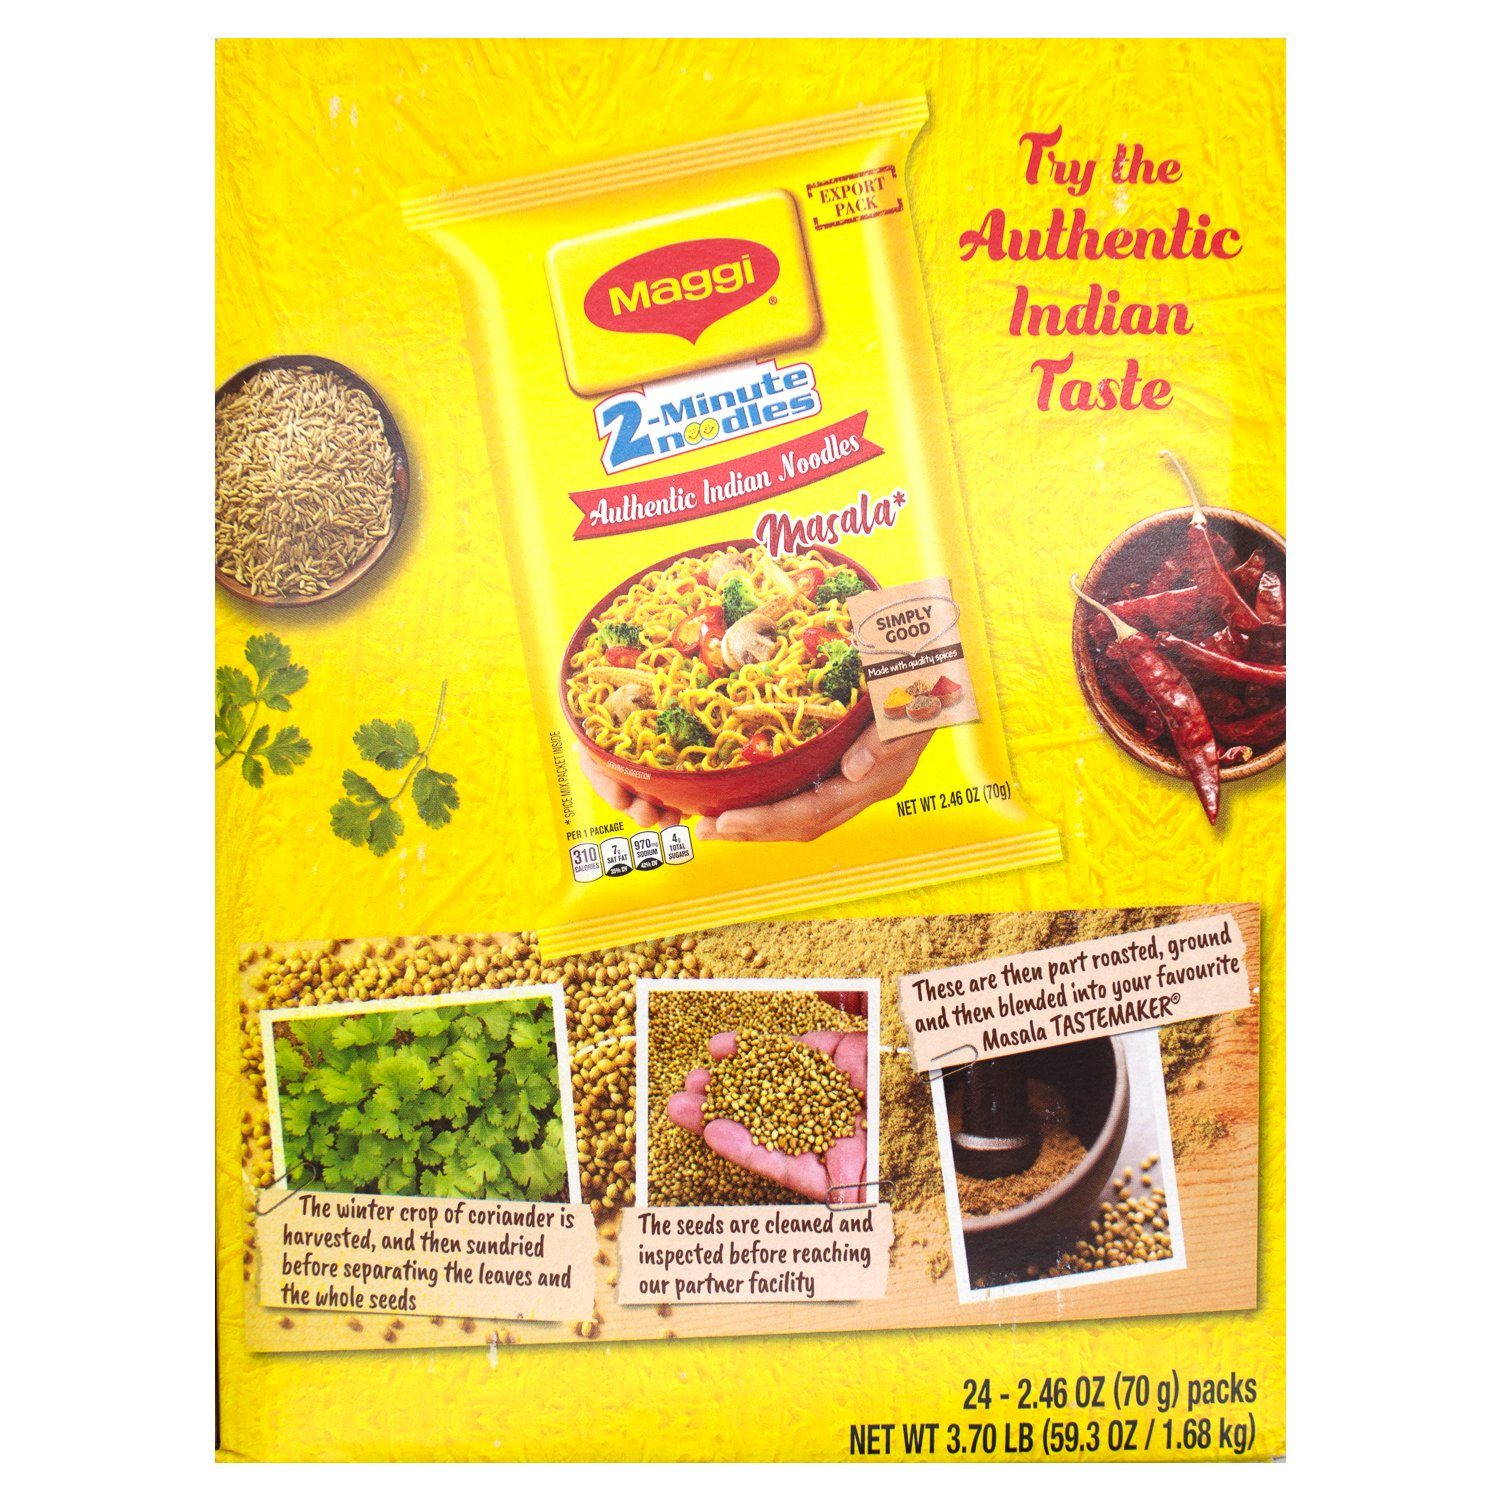 Maggi 2-Minute Authentic Indian Noodles Maggi 